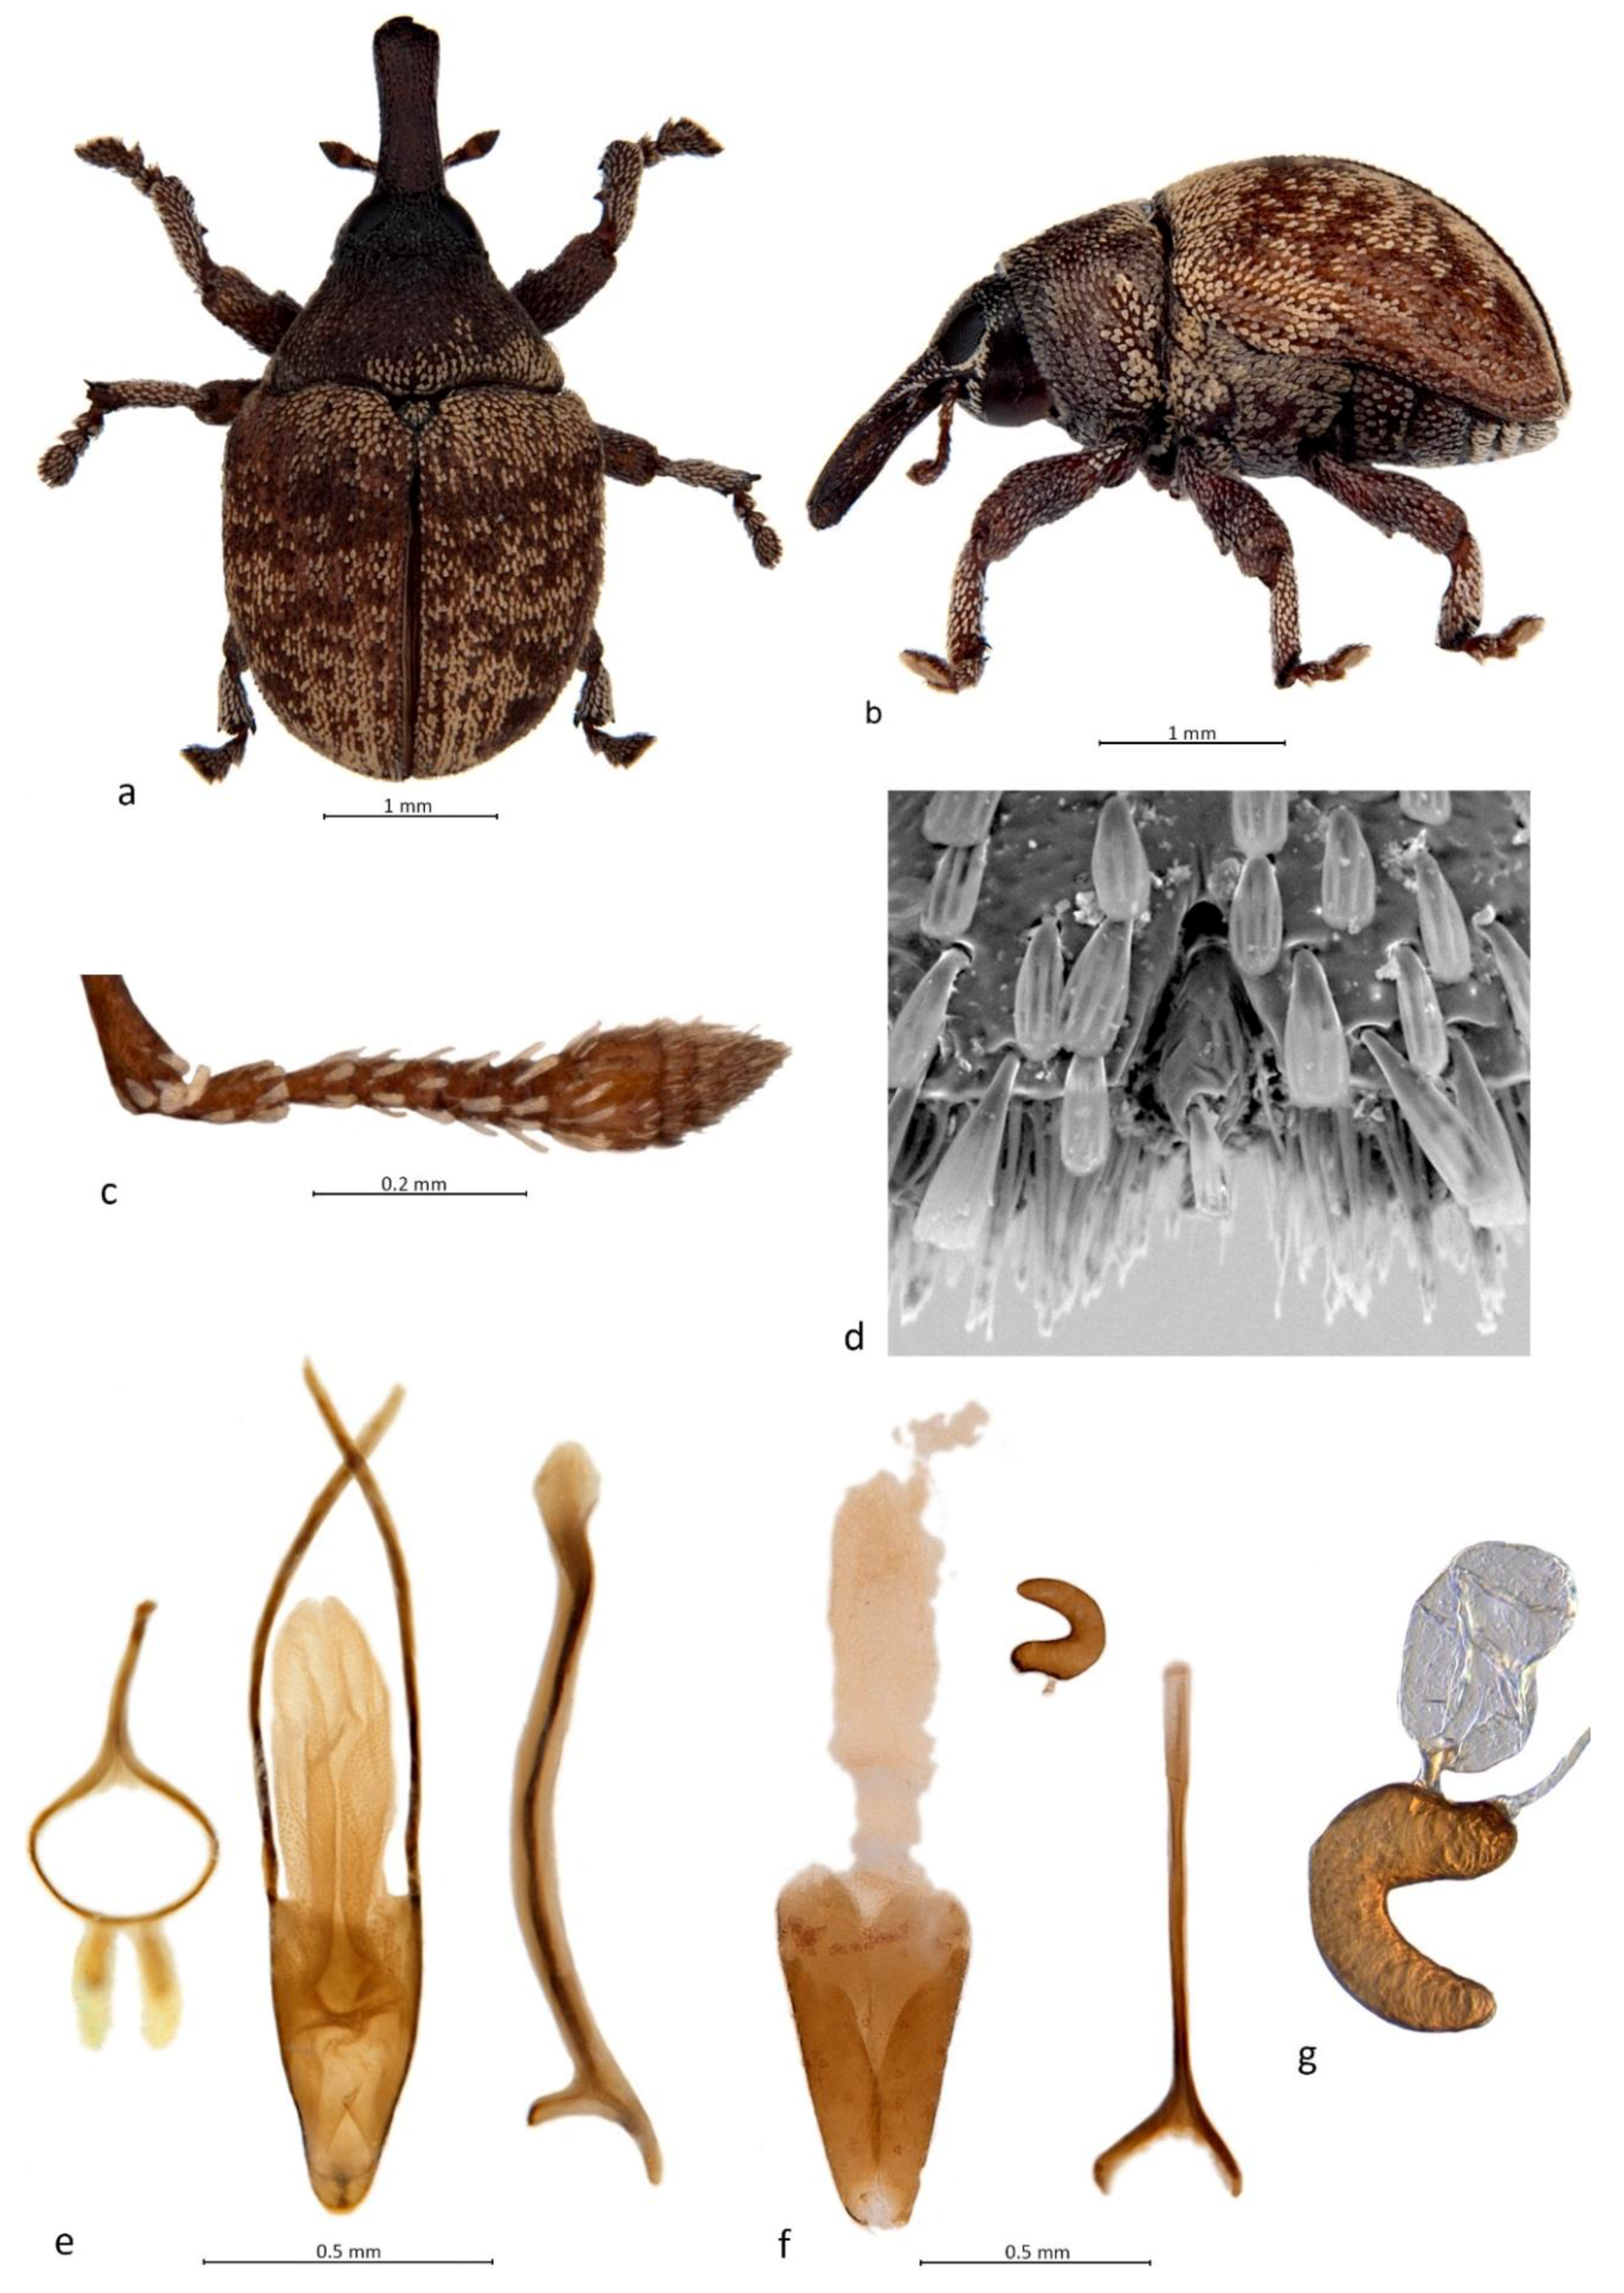 PDF) Growth Performance of the Red-Stripe Weevil Rhynchophorus schach Oliv.  (Insecta: Coleoptera: Curculionidae) on Meridic Diets